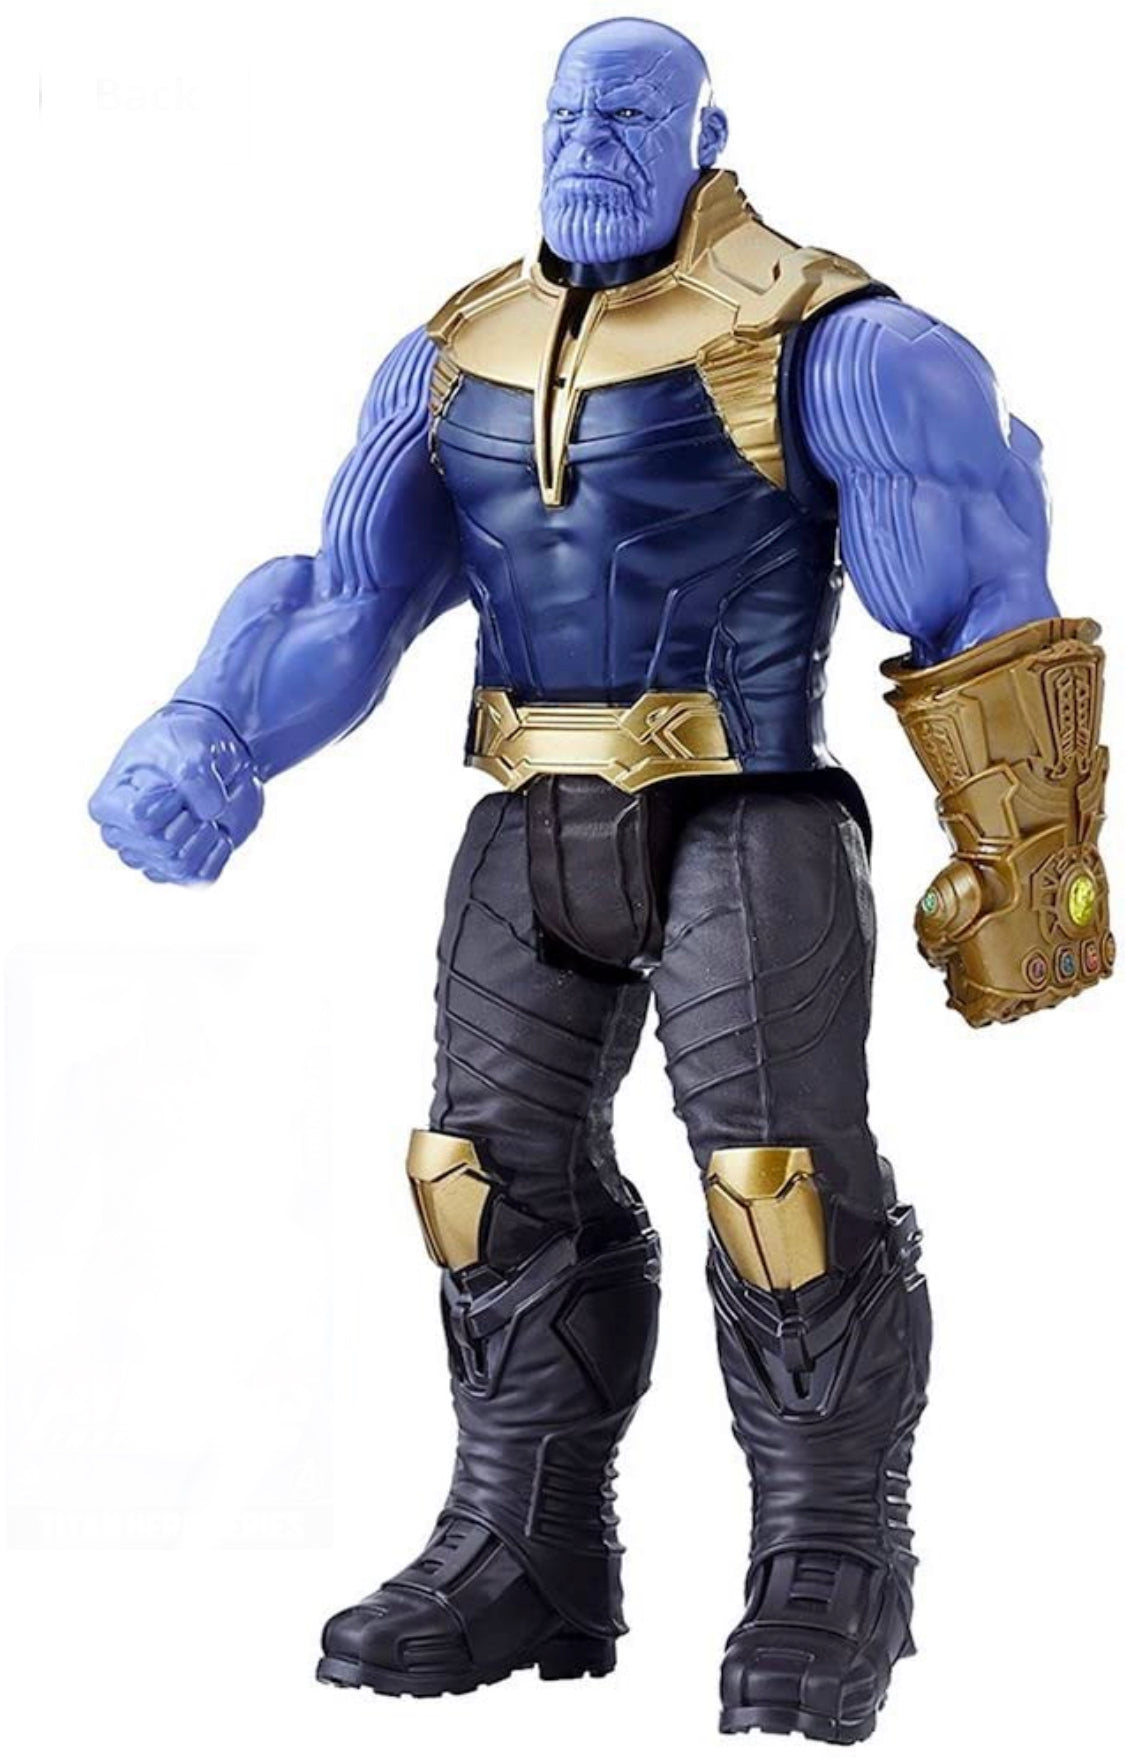 Avengers Infinity Wars Thanos Action Figure